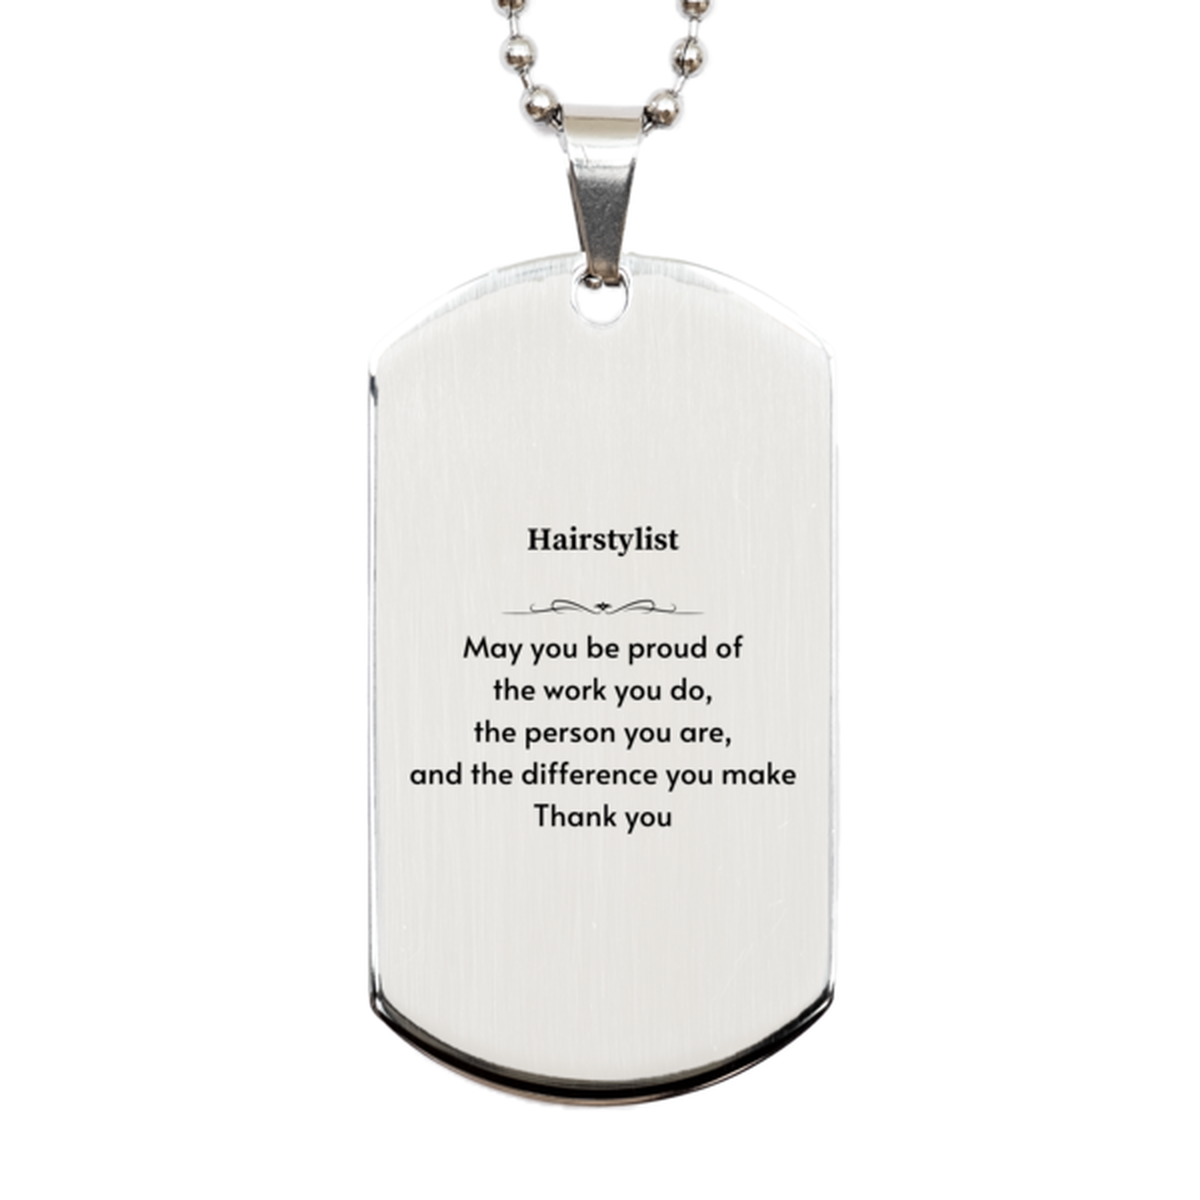 Heartwarming Silver Dog Tag Retirement Coworkers Gifts for Hairstylist, Hairstylist May You be proud of the work you do, the person you are Gifts for Boss Men Women Friends